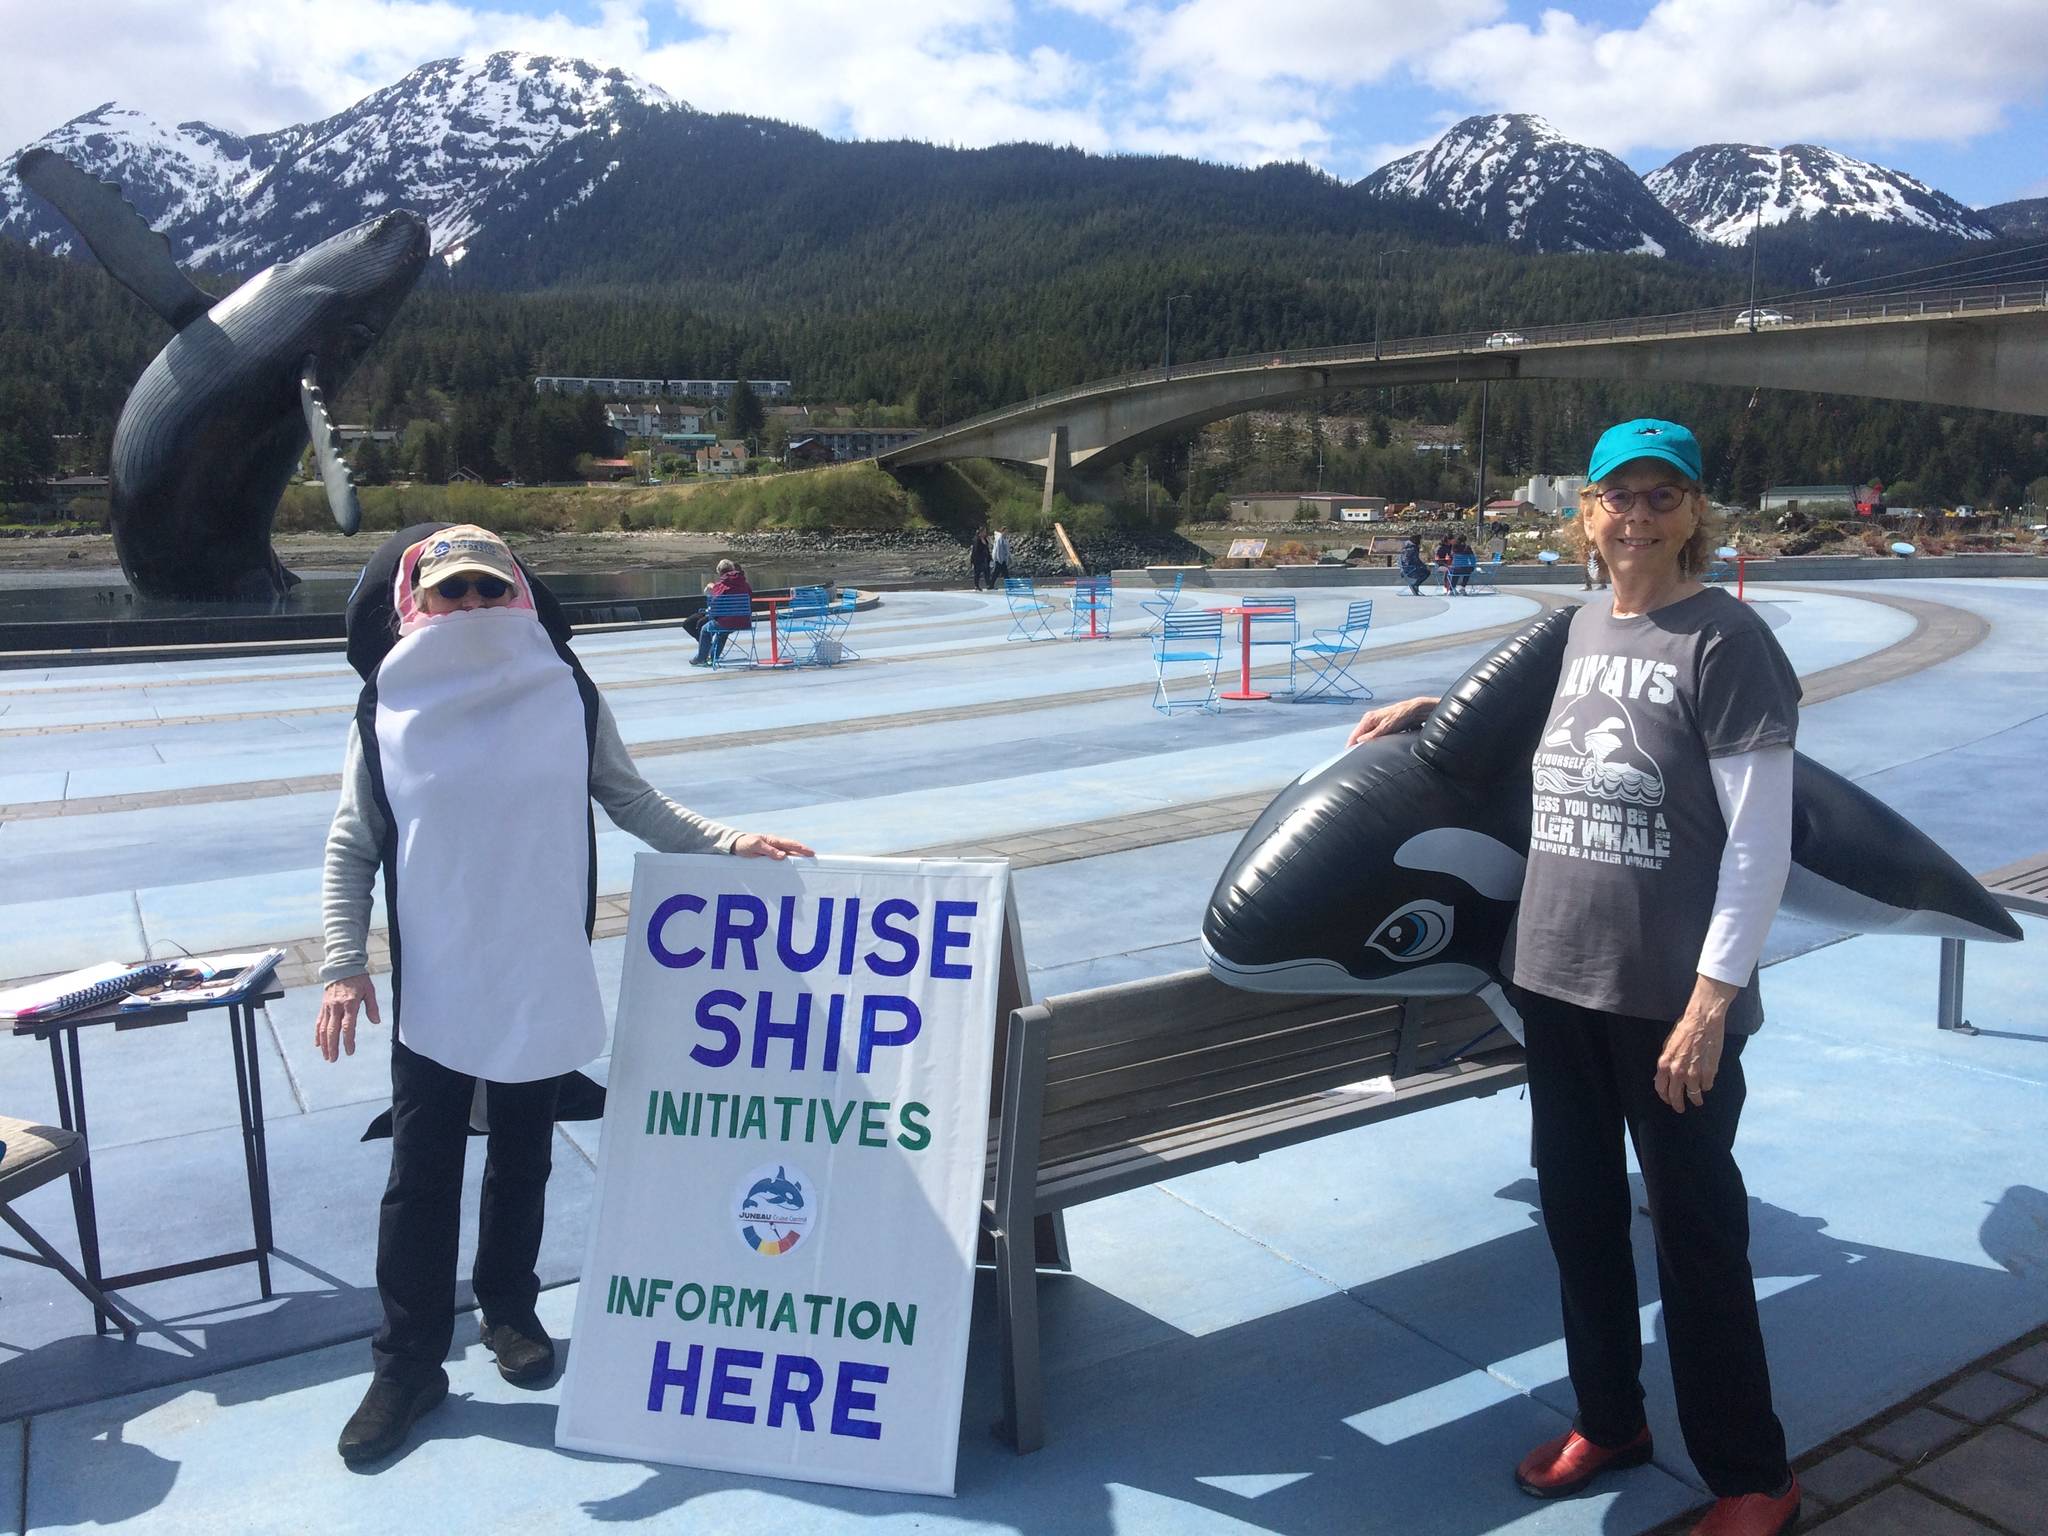 Pat White (left) and Sue Schrader (right), collect signatures to move a trio of initiatives aimed at curbing cruise ship visits to Juneau onto October's municipal ballot. The pair are members of a group called Juneau Cruise Control. With a less than a week until the June 4 deadline to submit signatures for each question, organizers are not releasing the number of singatories to date. (Courtesy photo/Sue Schrader)